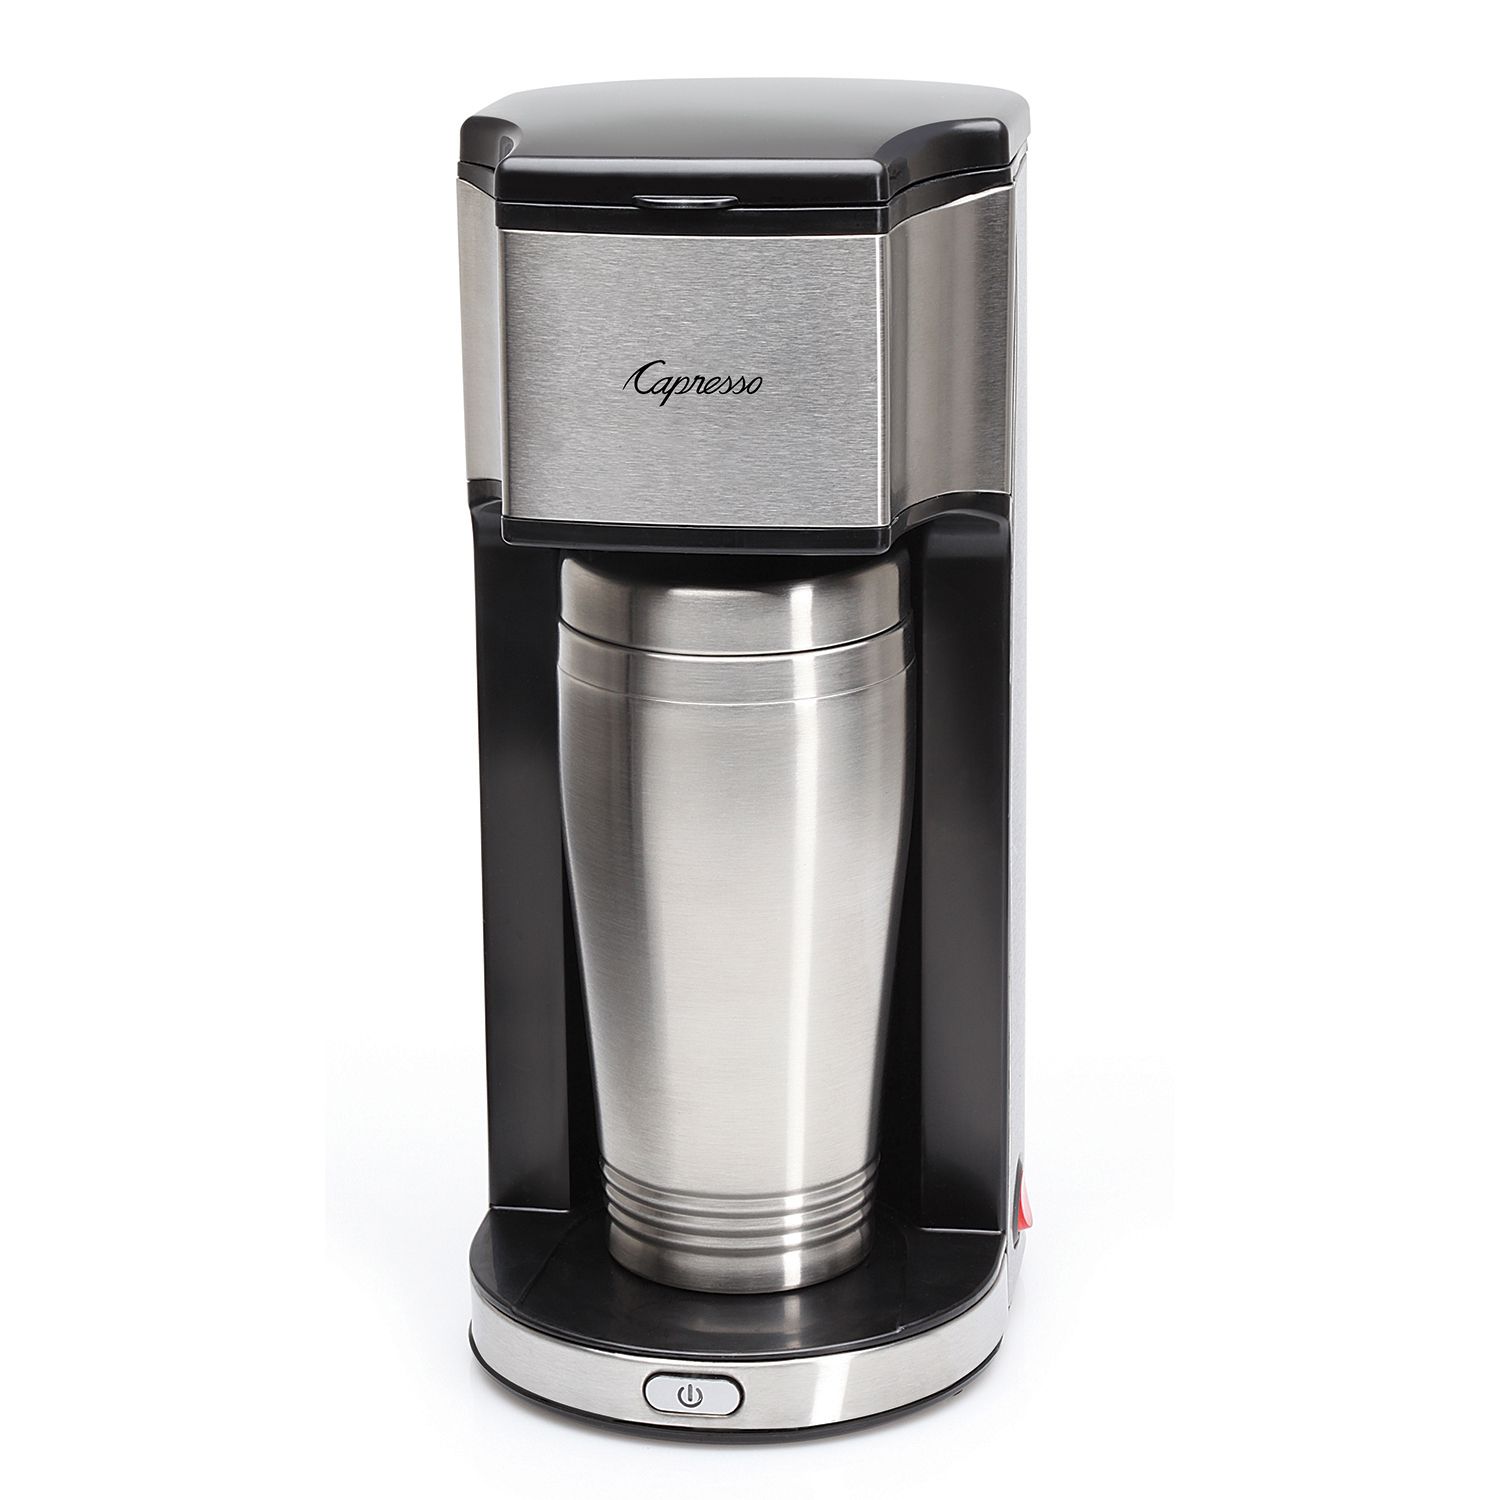 Capresso Automatic Milk Frother Froth Pro - Black/silver 202.04